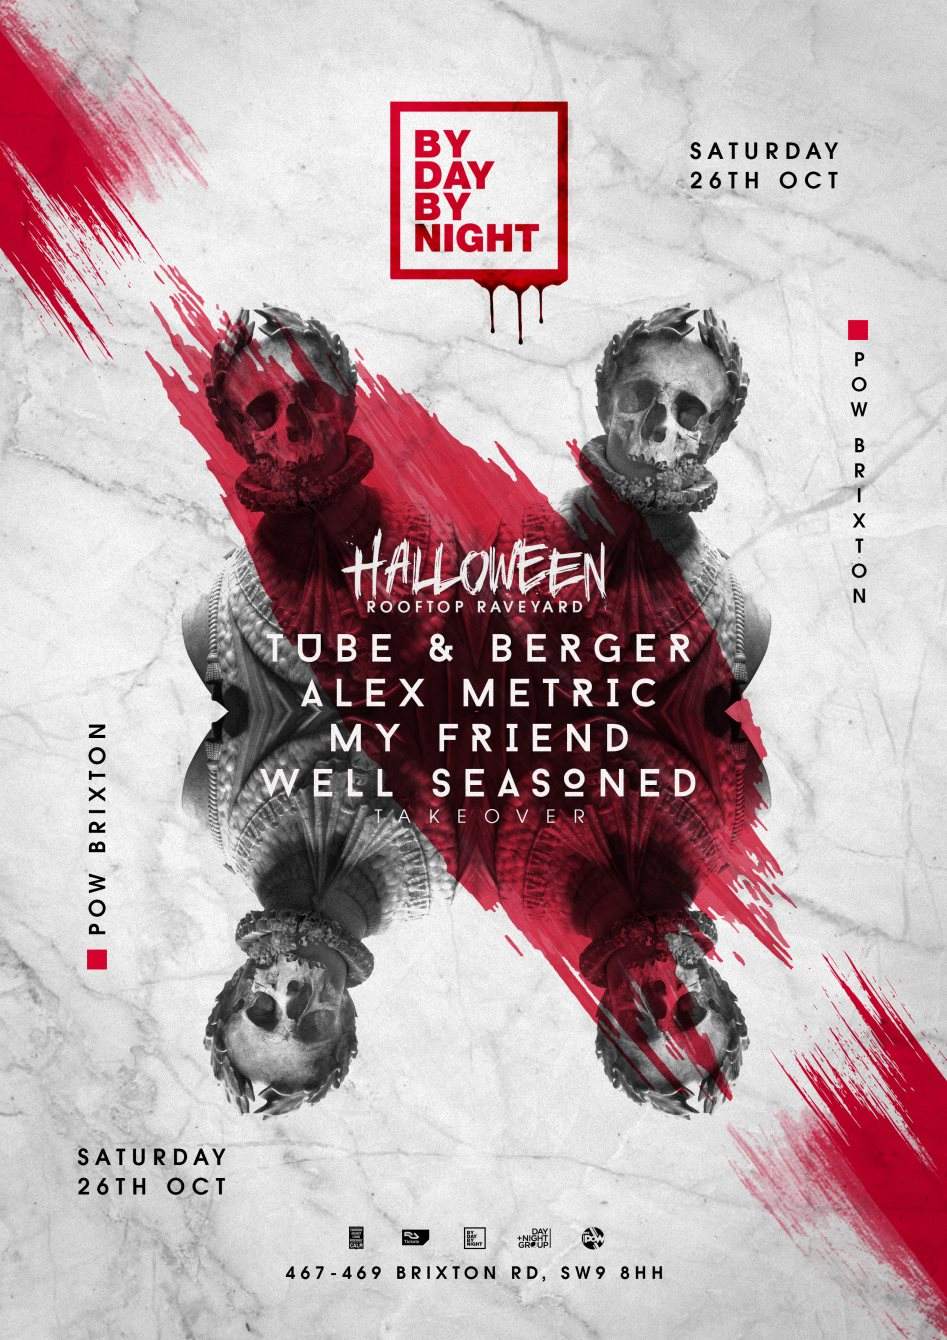 Halloween Rooftop Raveyard with Tube & Berger + Alex Metric - フライヤー表